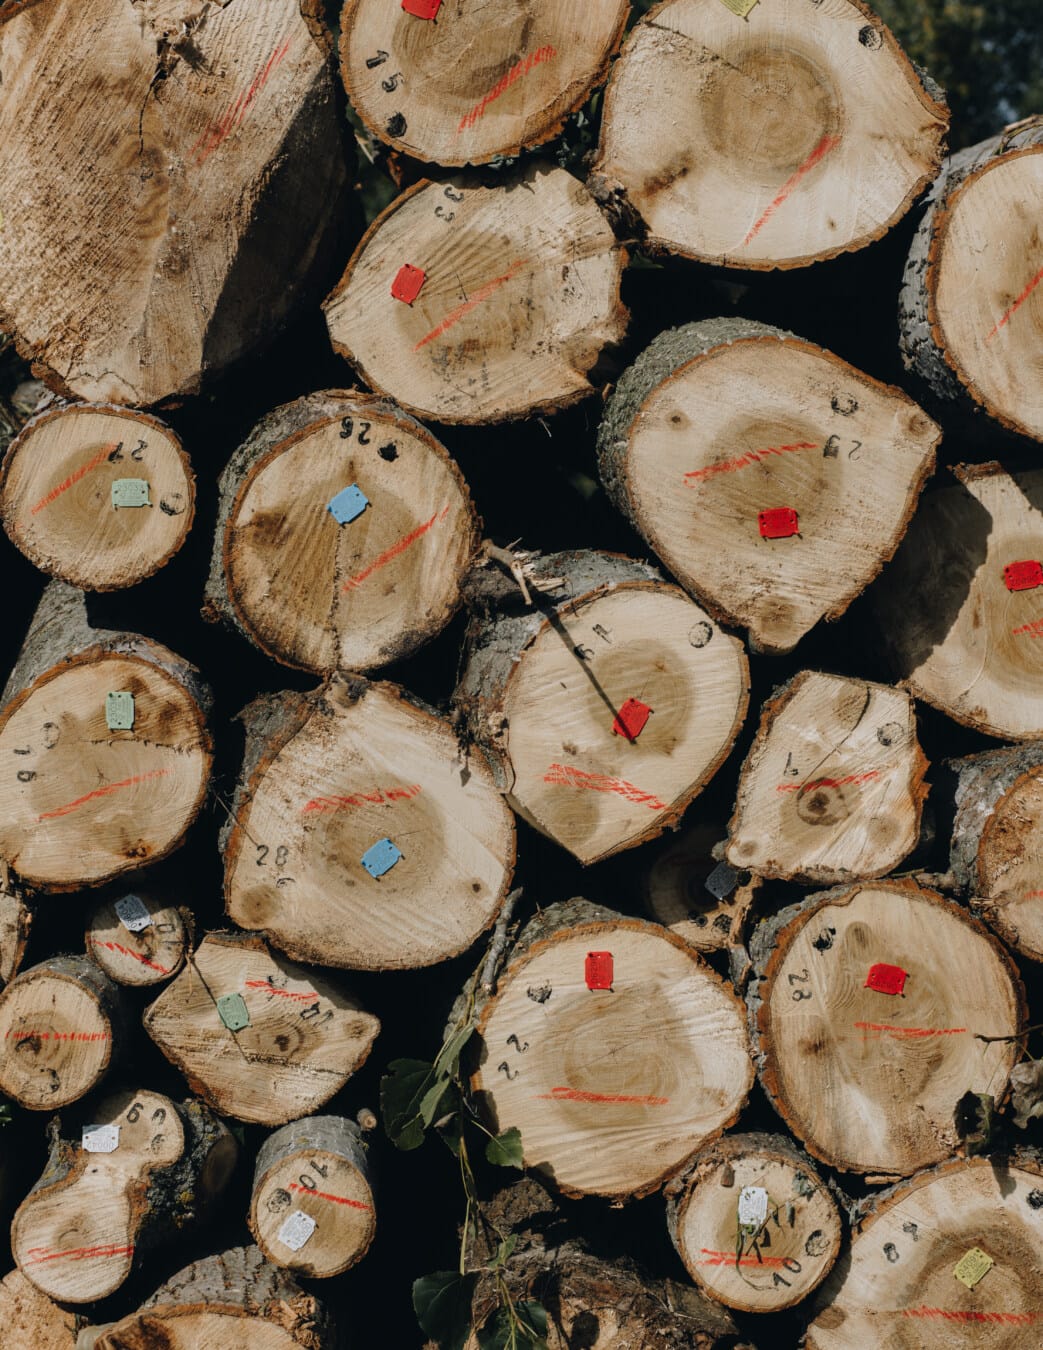 firewood, production, cross section, merchandise, wood, tree trunk, industry, stacks, fuel, wooden